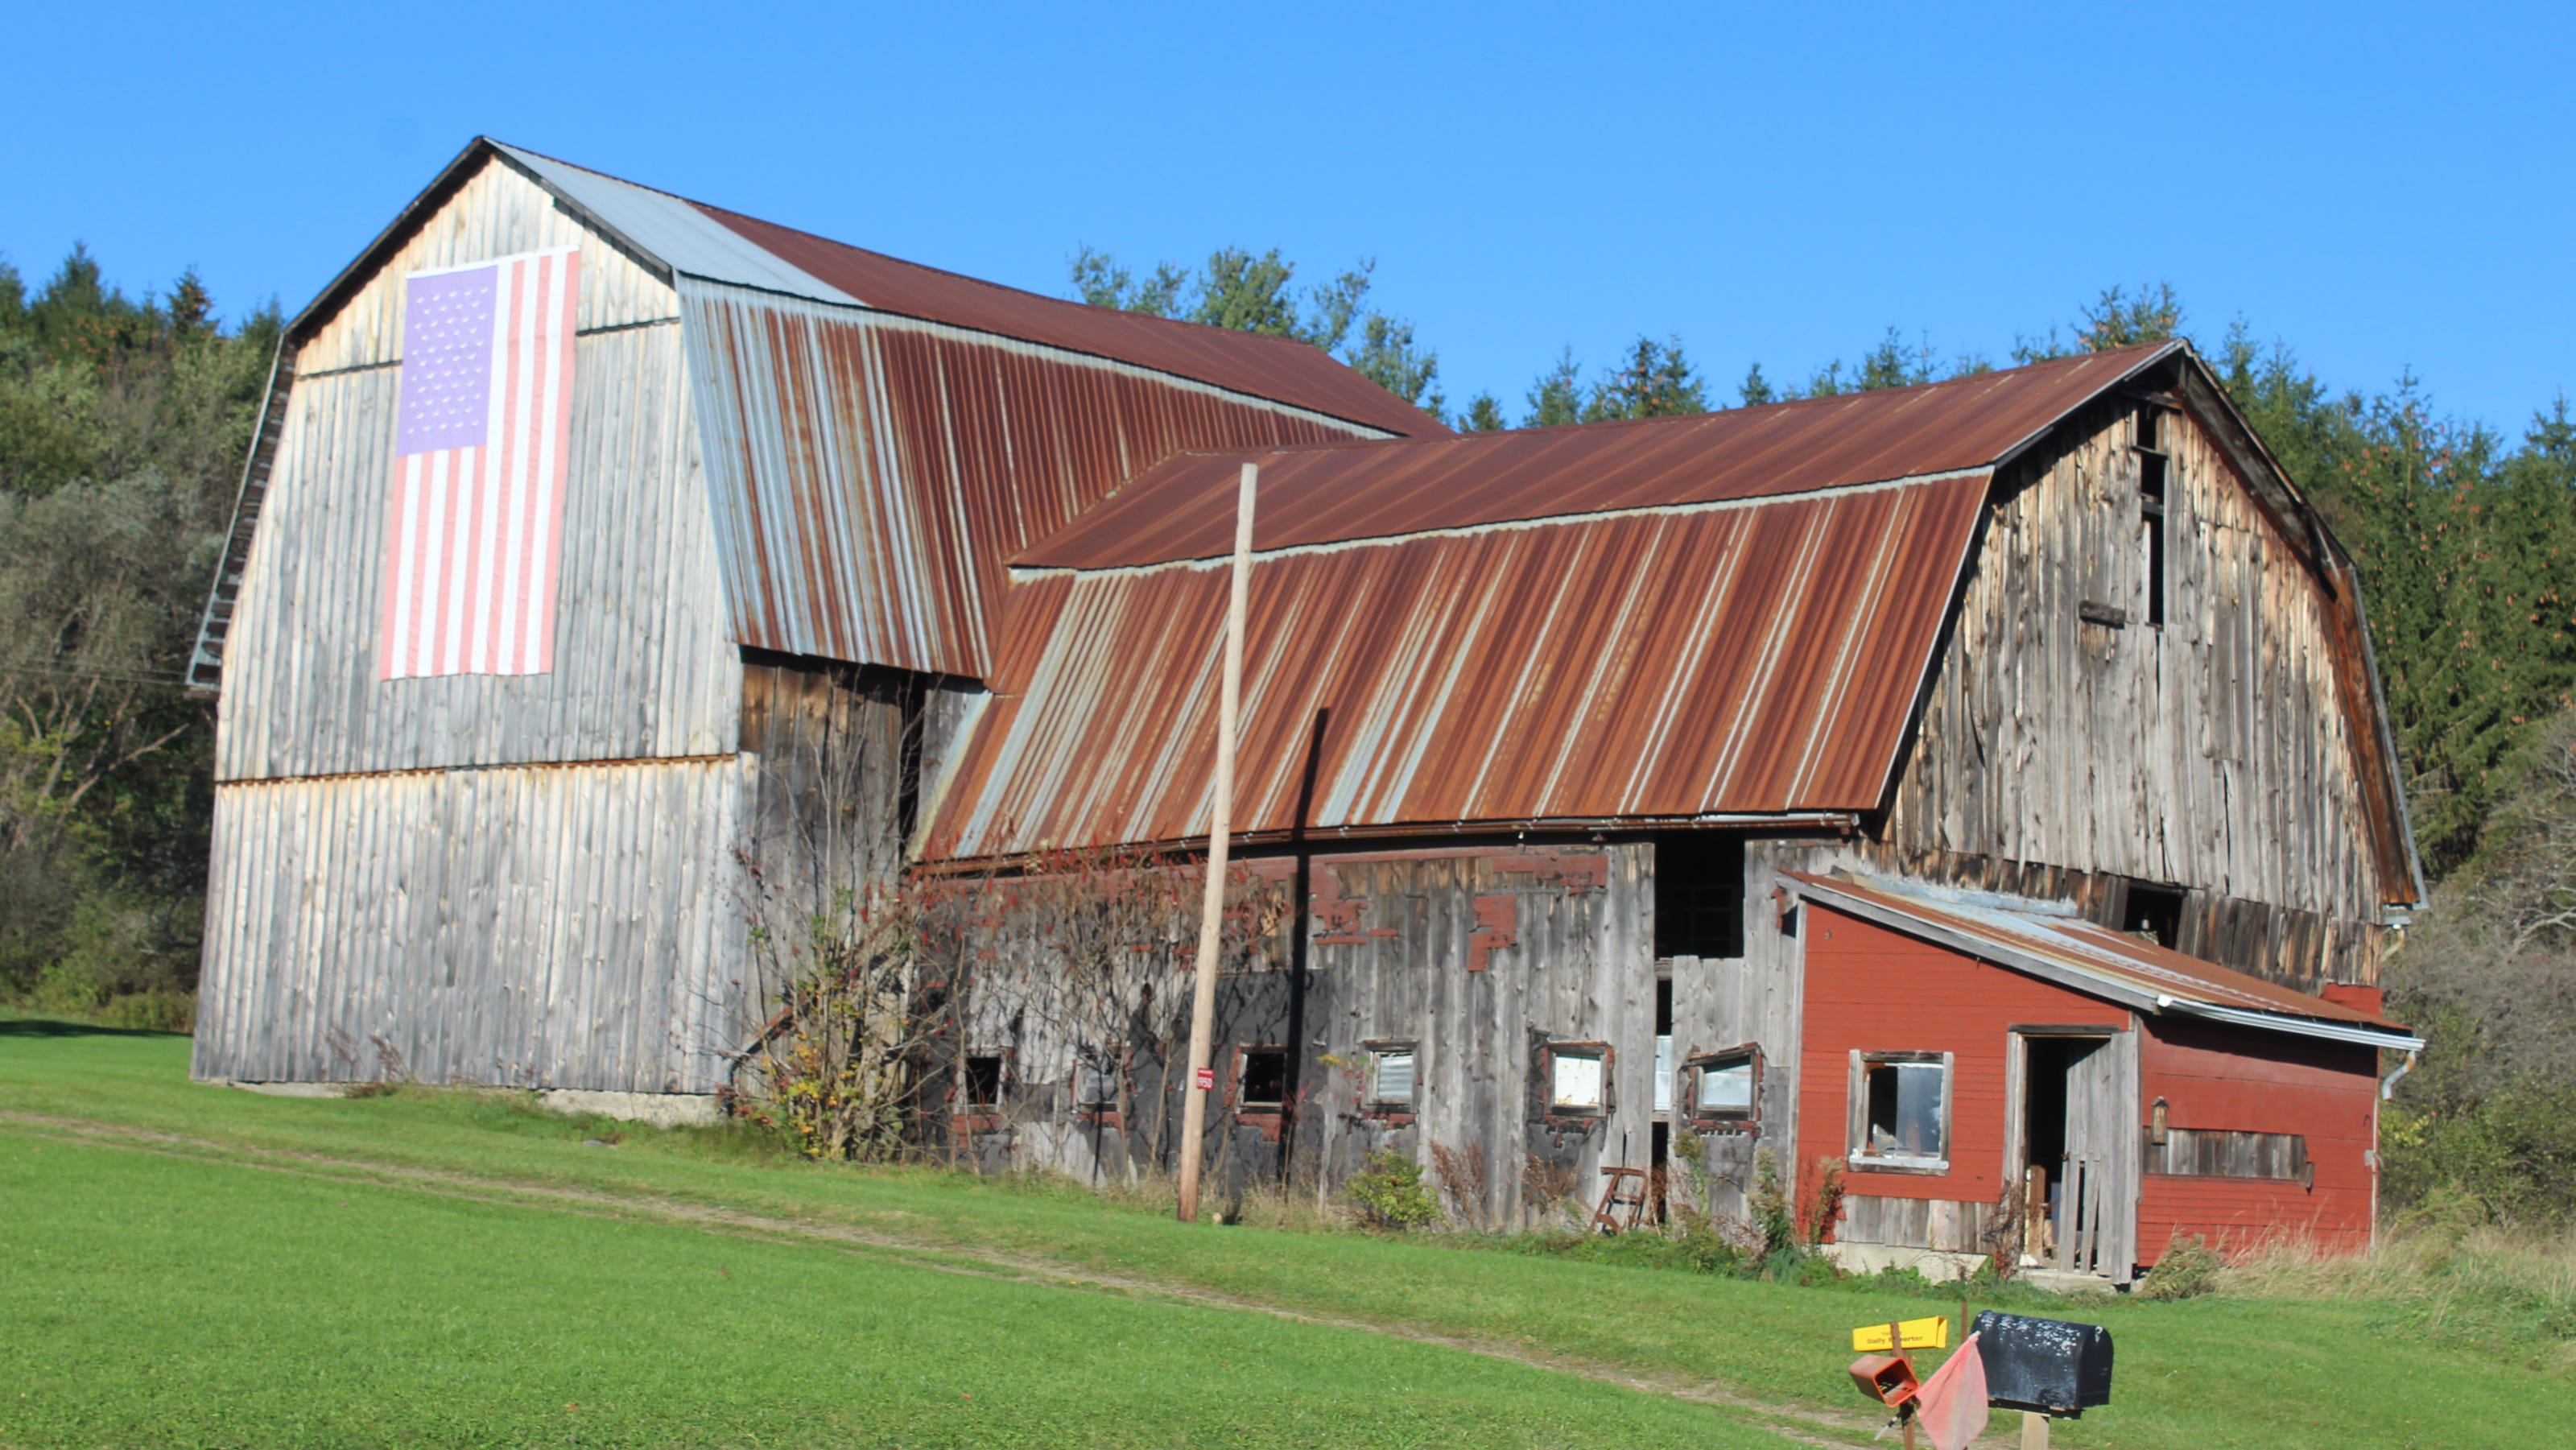 new-york-state-tax-credit-aims-spur-rehab-transformation-of-old-barns